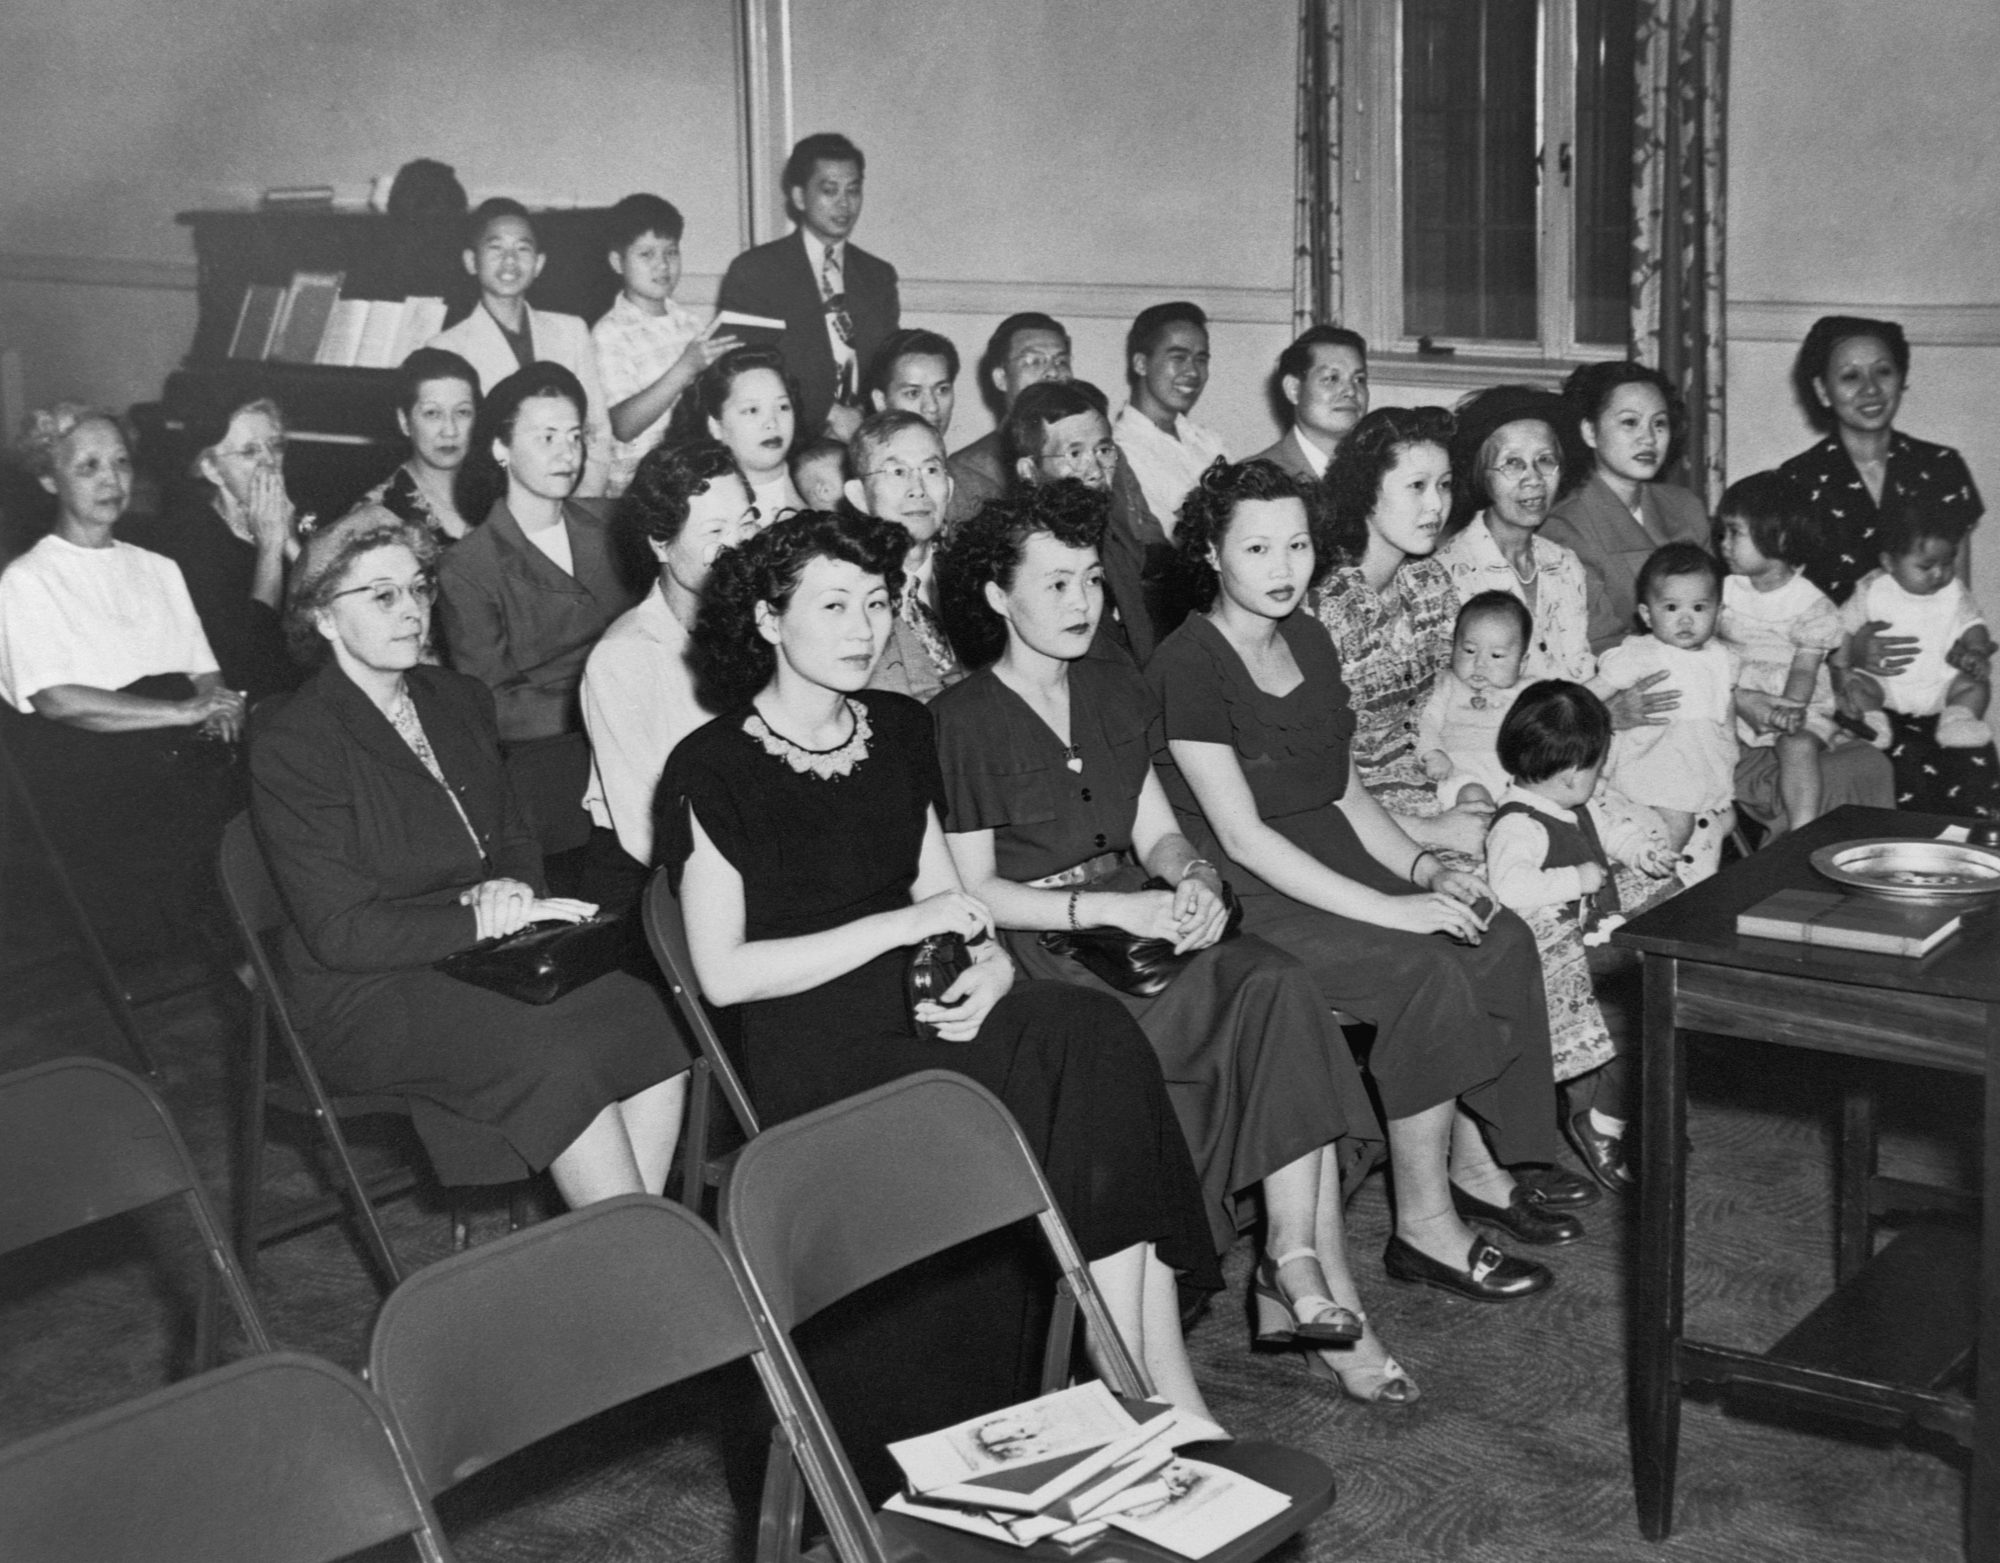 The wives of Chinese-American servicemen, who came to America as war brides after World War II, attend a Chinese-language Sunday school class at Westminster Presbyterian Church in Minneapolis in 1950.